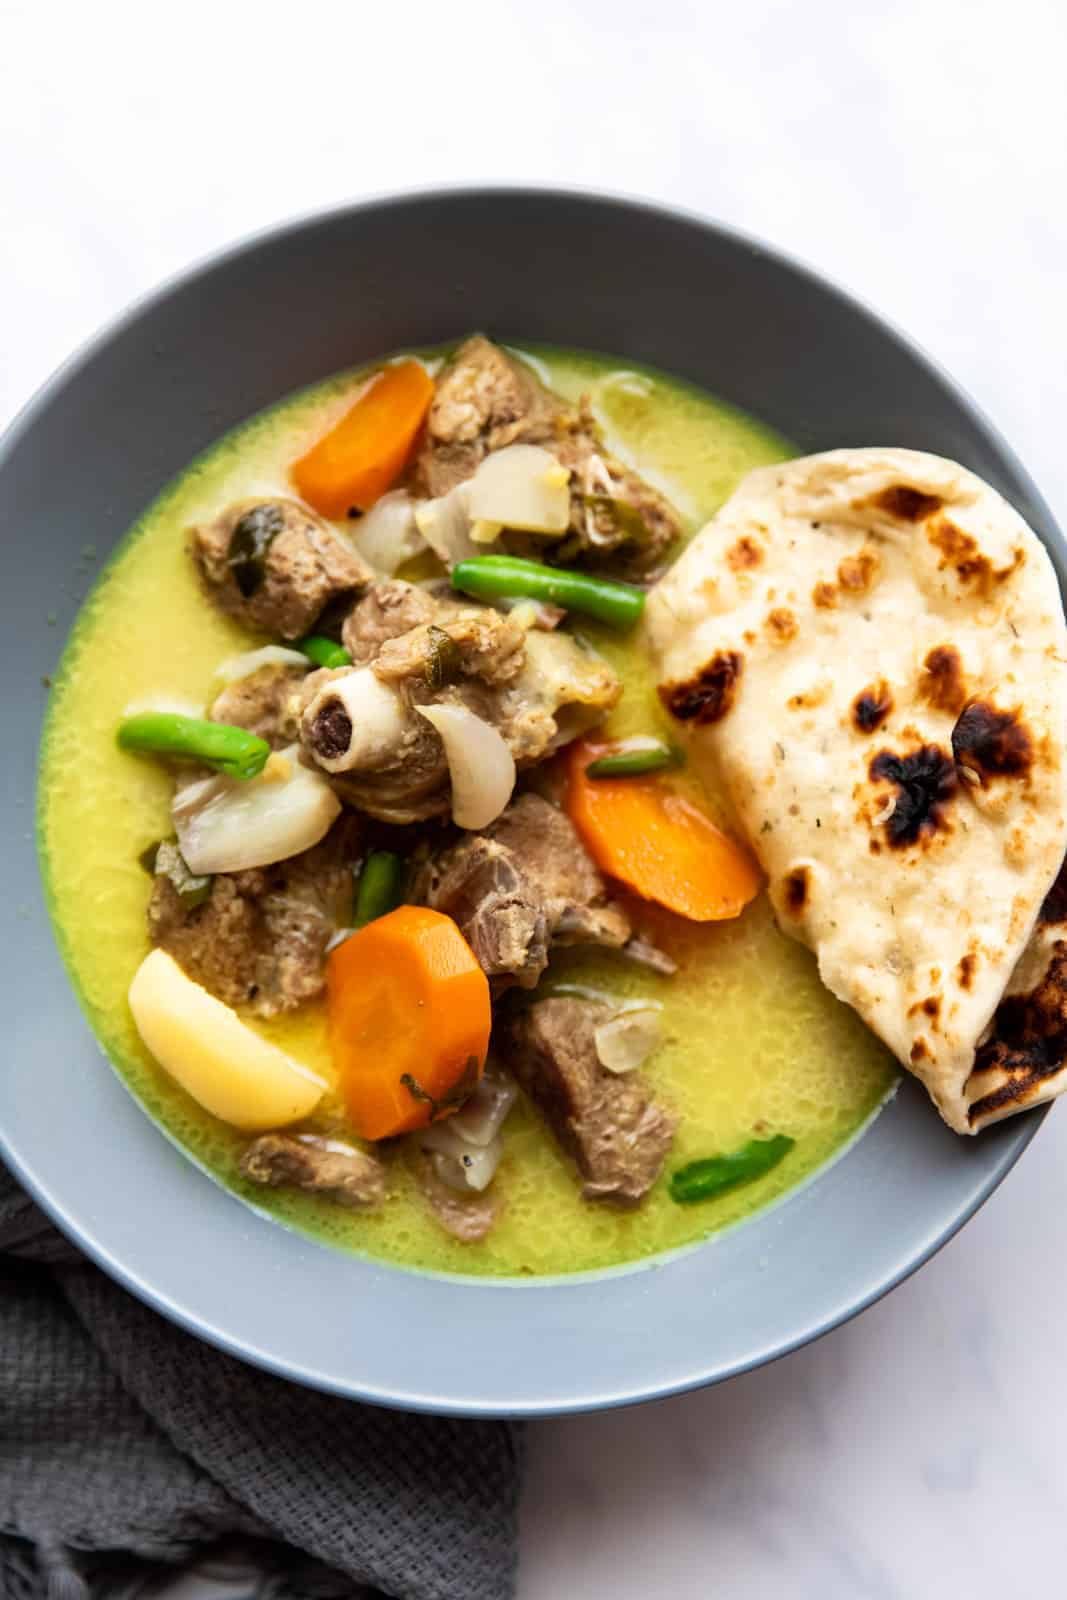 Mutton stew with coconut served in a bowl with naan bread